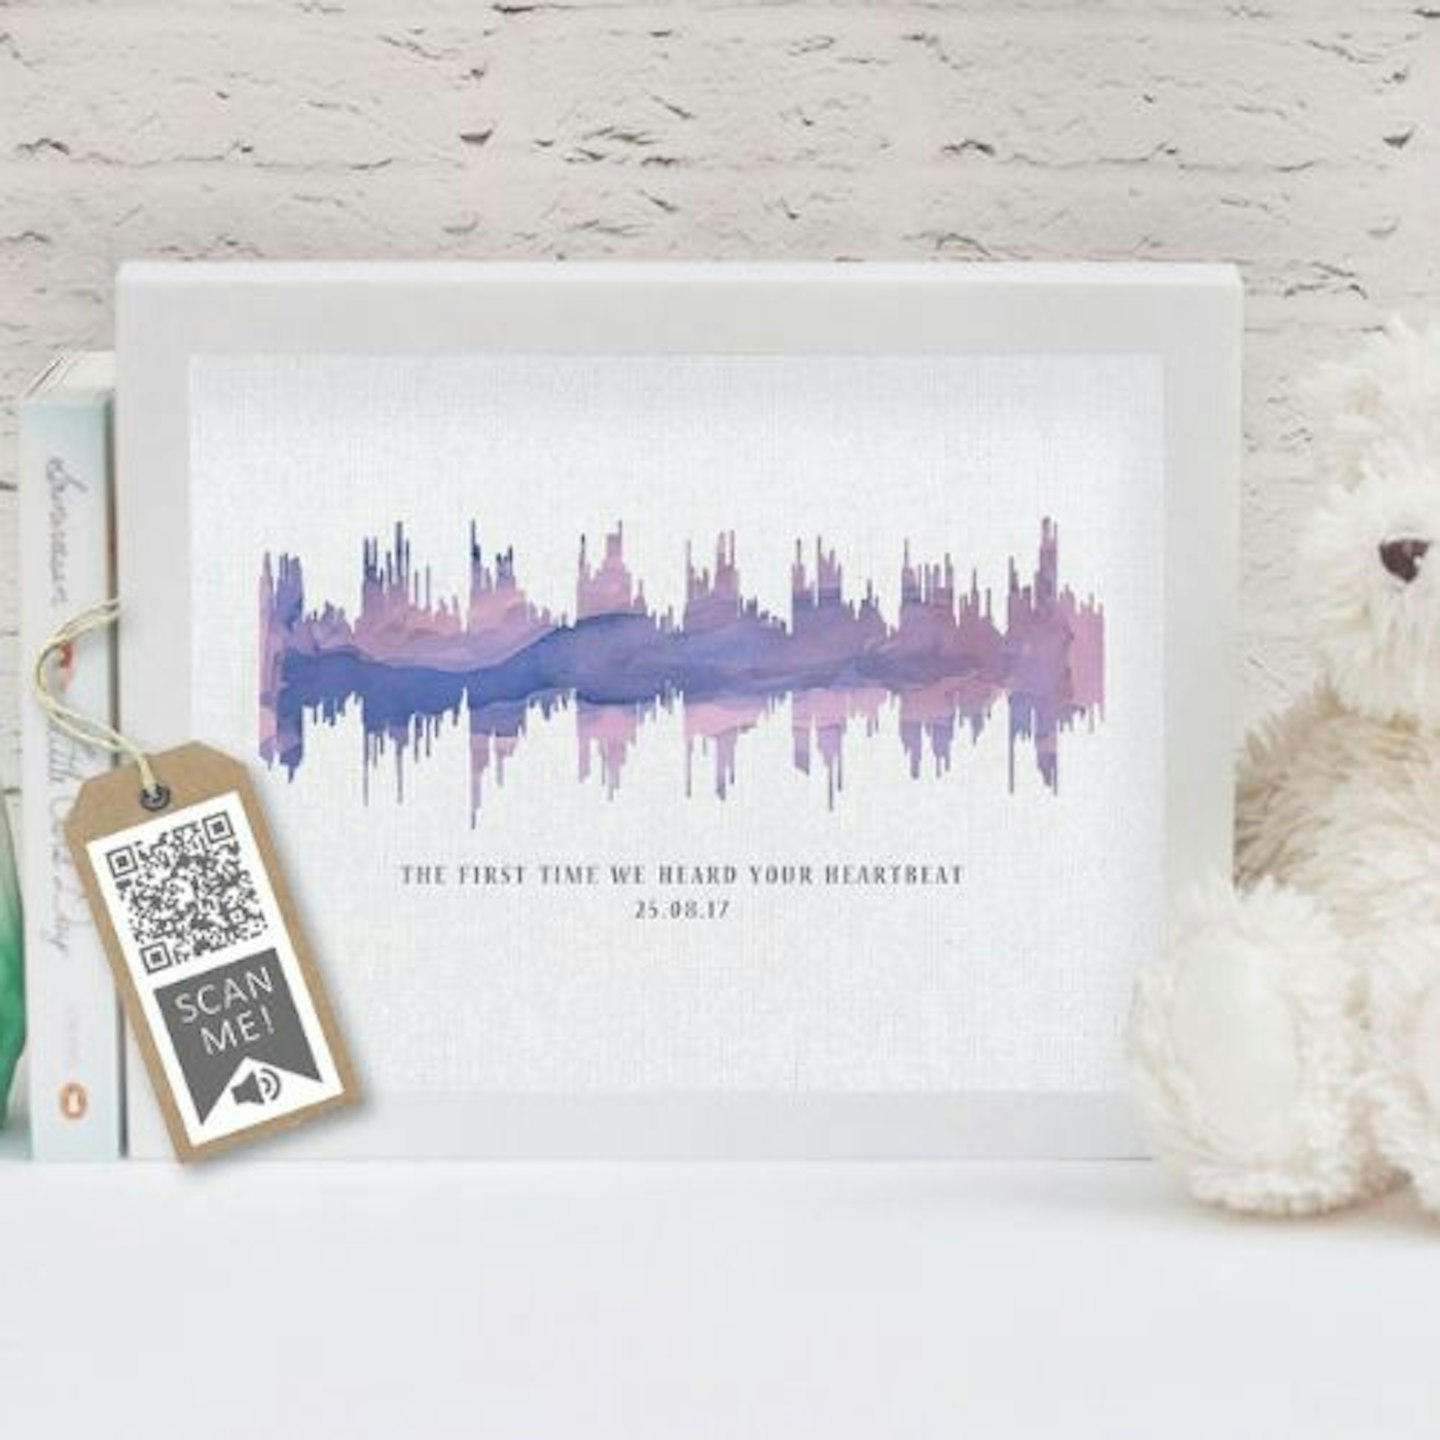 Best push present gifts Baby Heartbeat Sound Wave